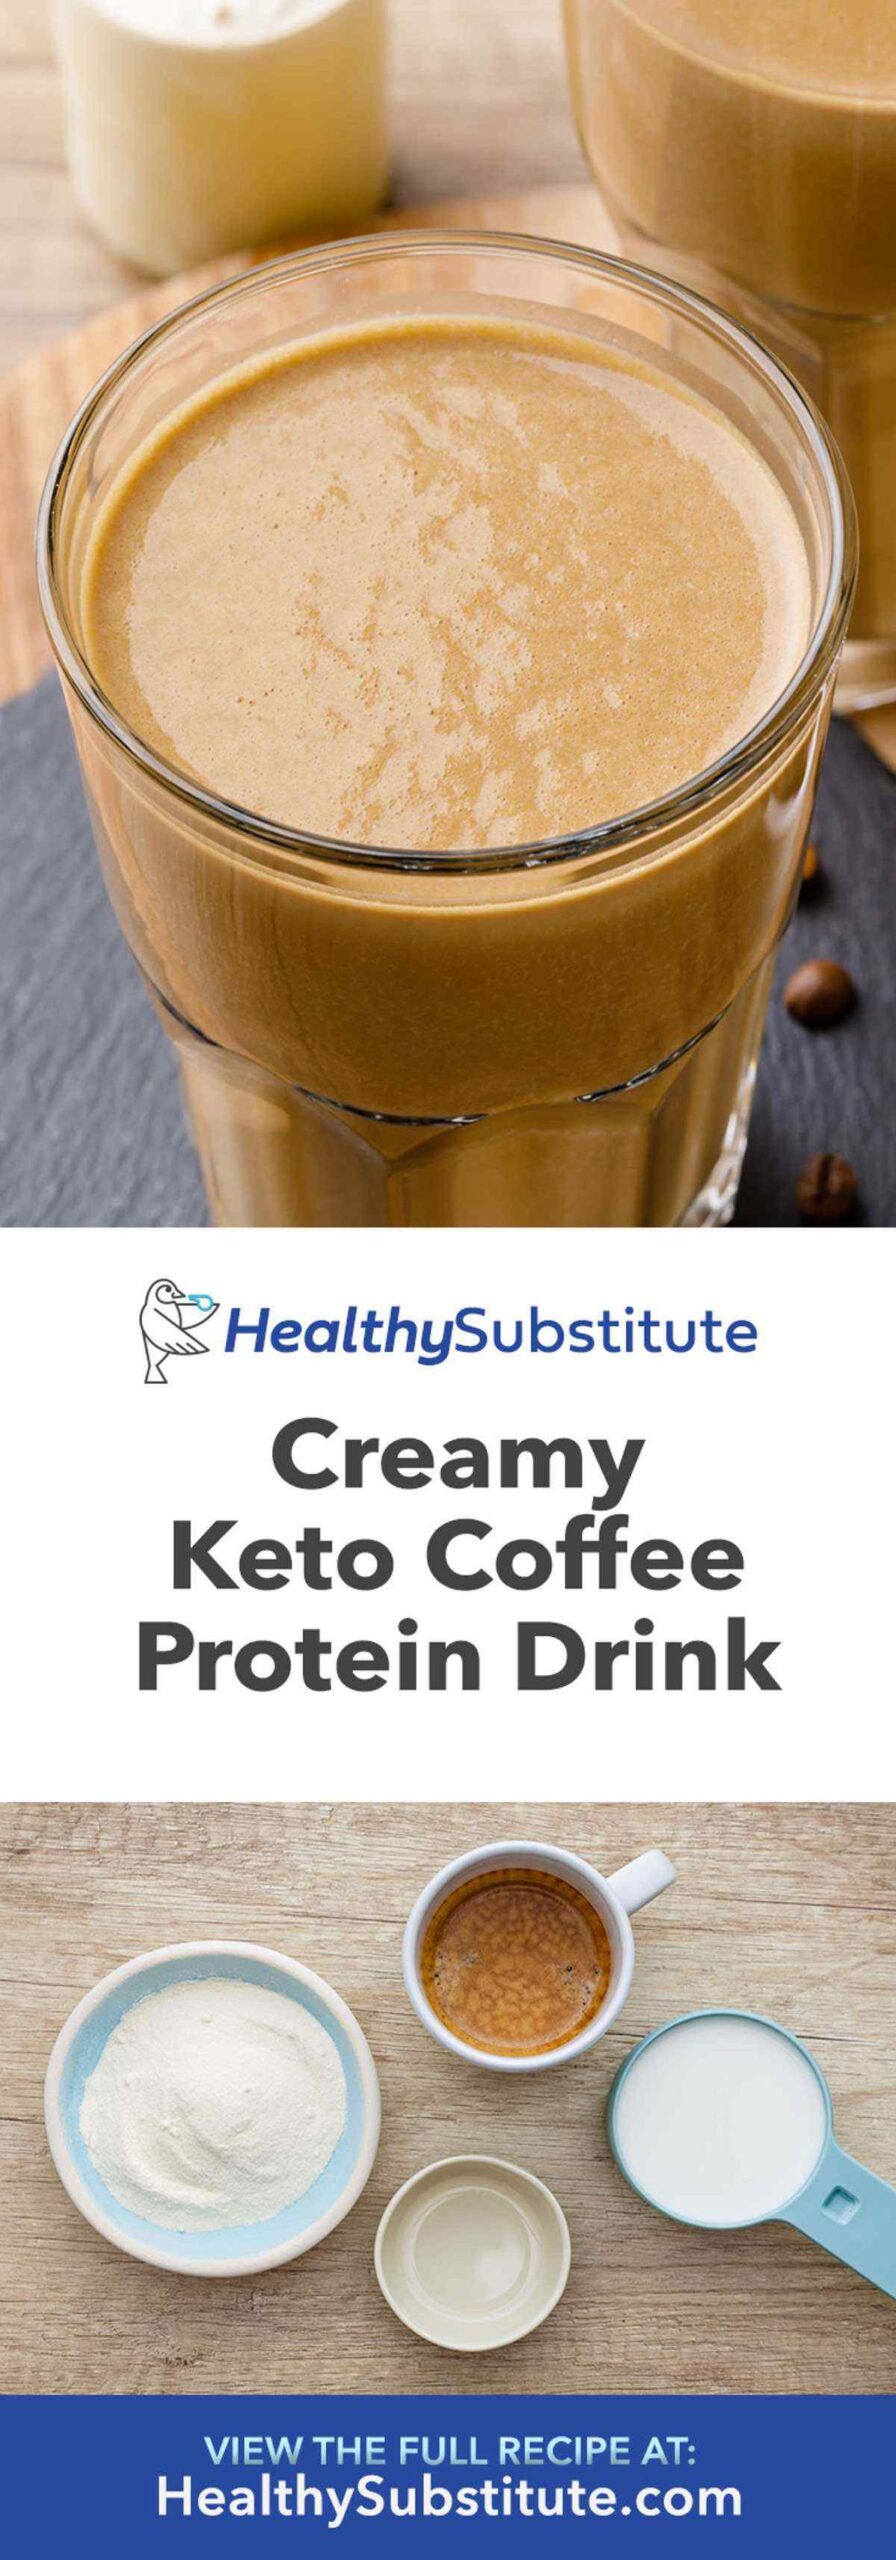  Wake up and smell the Creamy Keto Coffee, the ultimate morning treat.